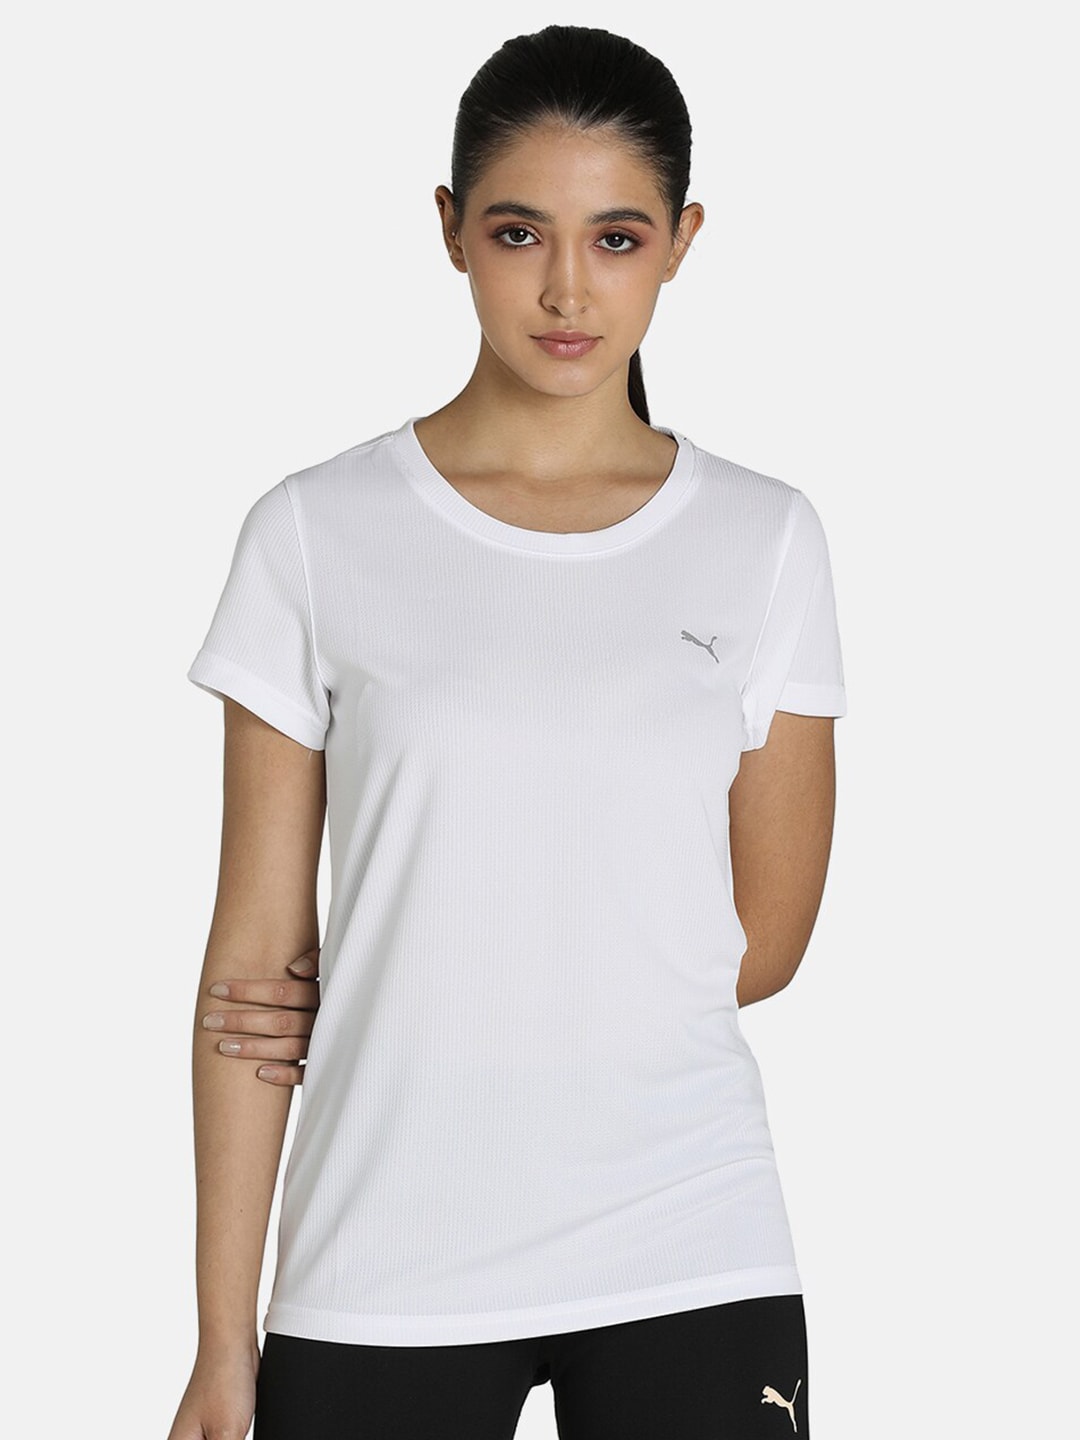 Puma Women White Training or Gym Sports T-shirt Price in India